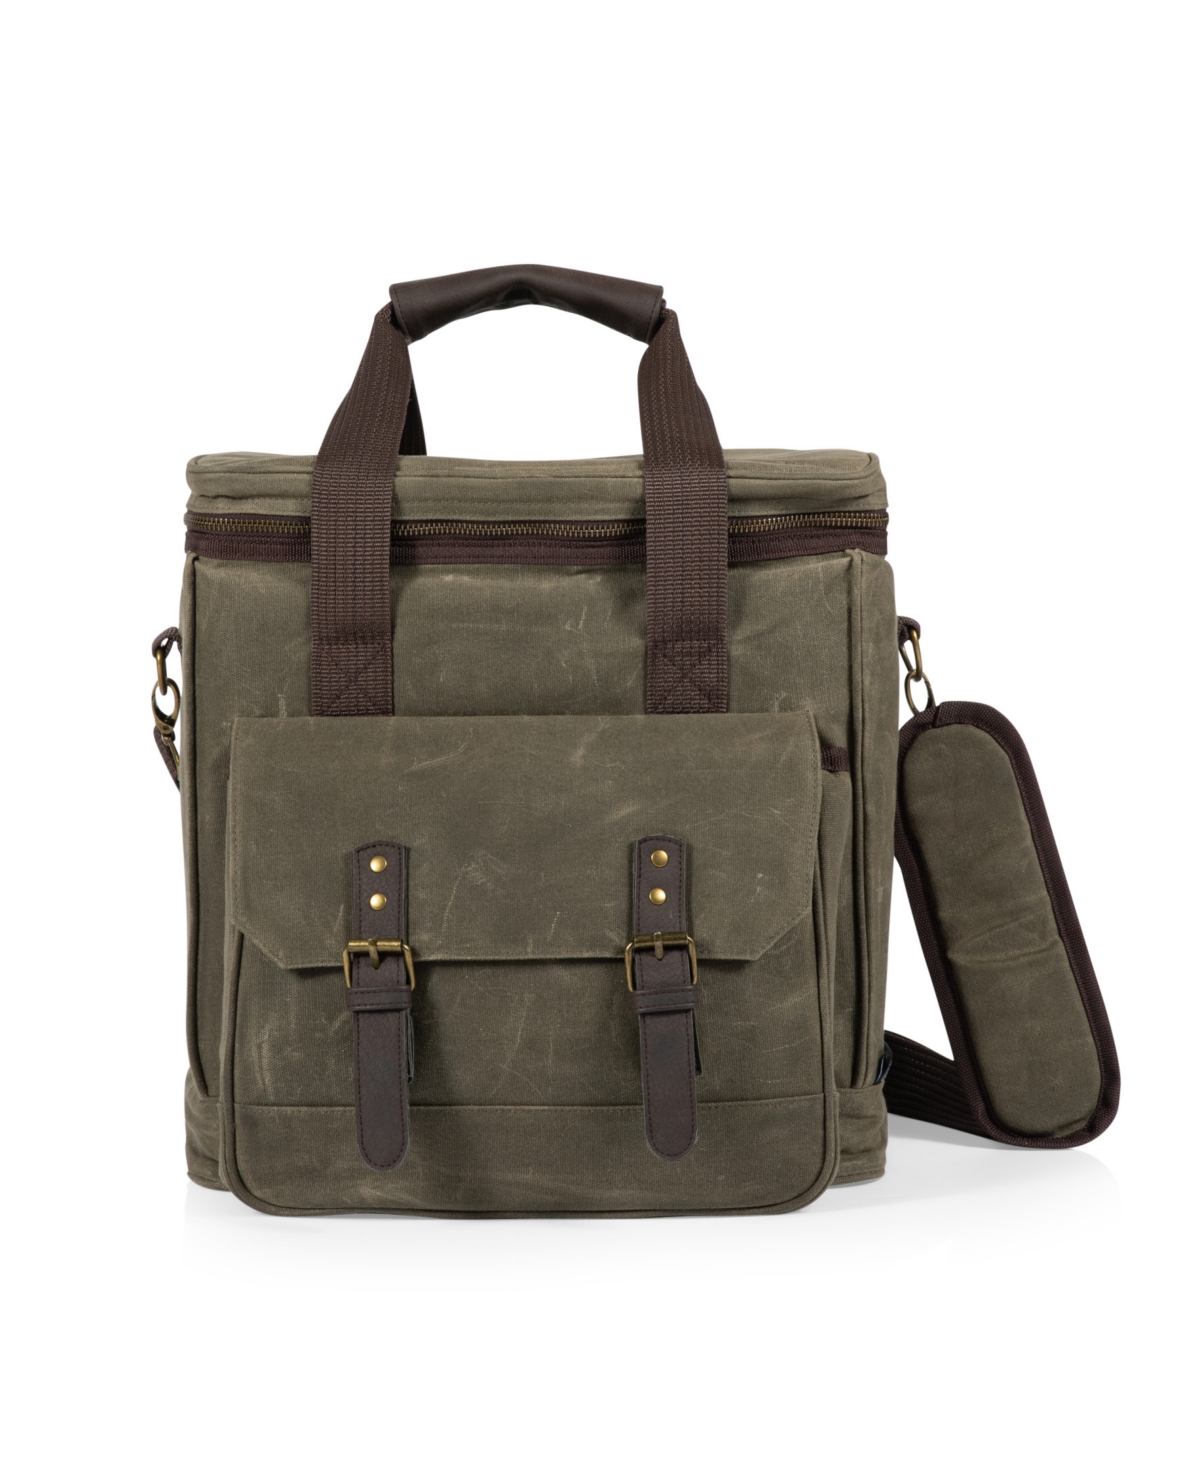 Legacy Weekender 6 Bottle Insulated Wine Bag In Khaki Green With Brown Accents